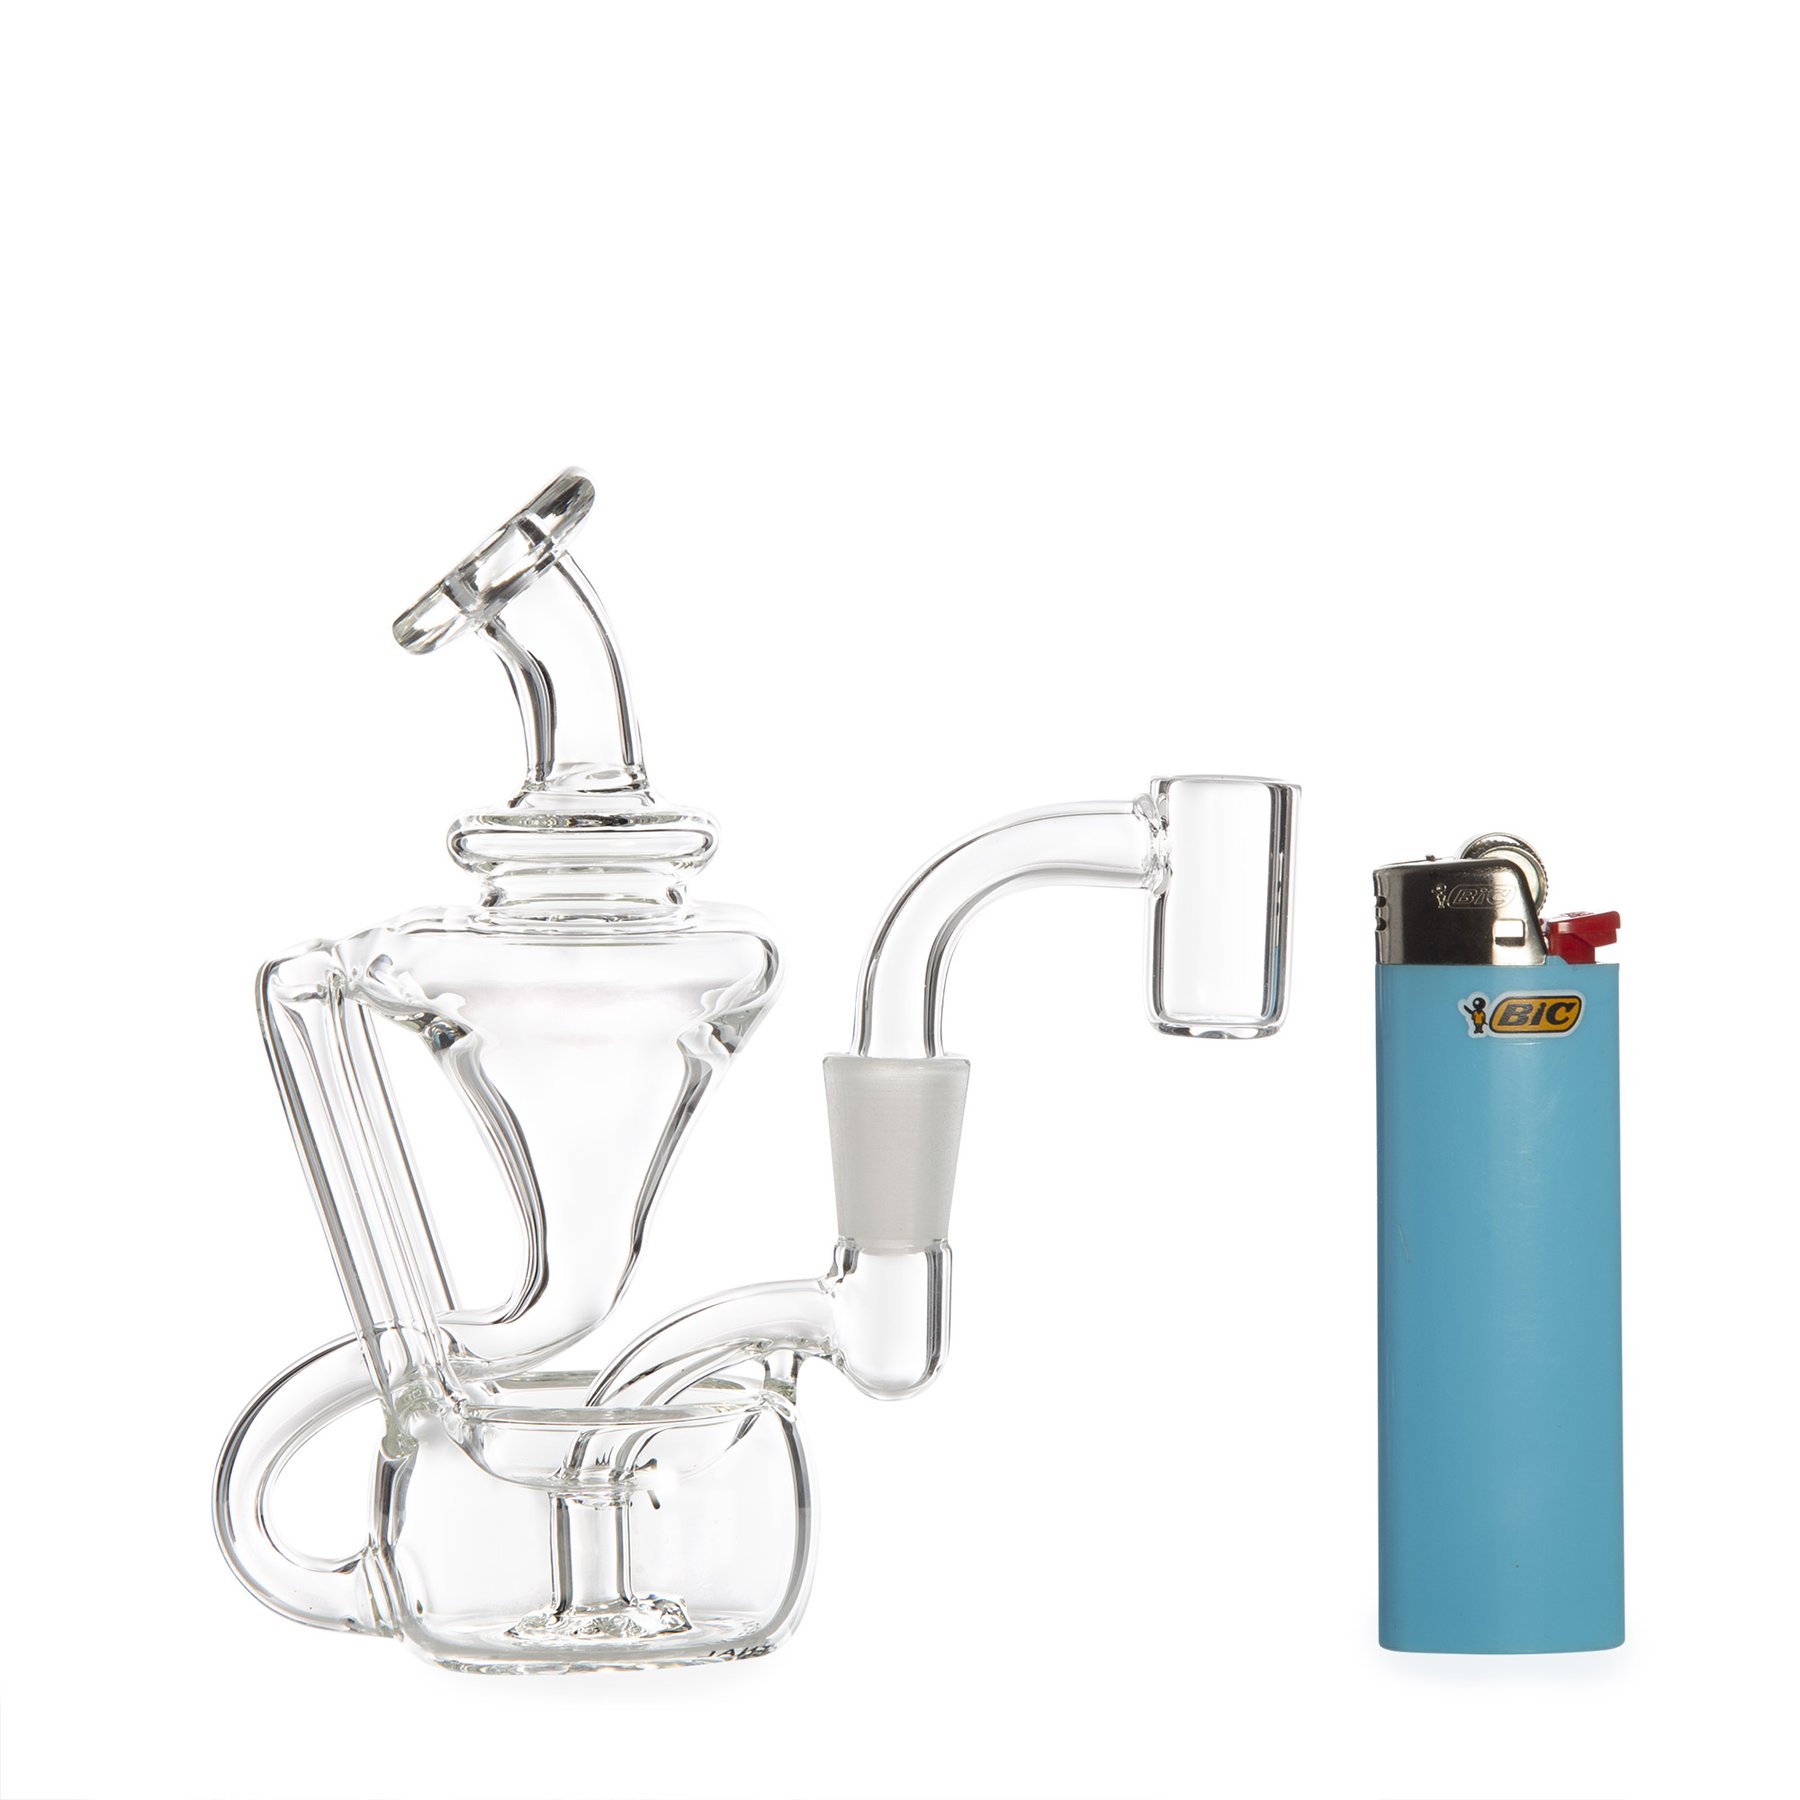 Mj Arsenal 'Claude' Mini Rig / $ 48.99 Available At 420 Science